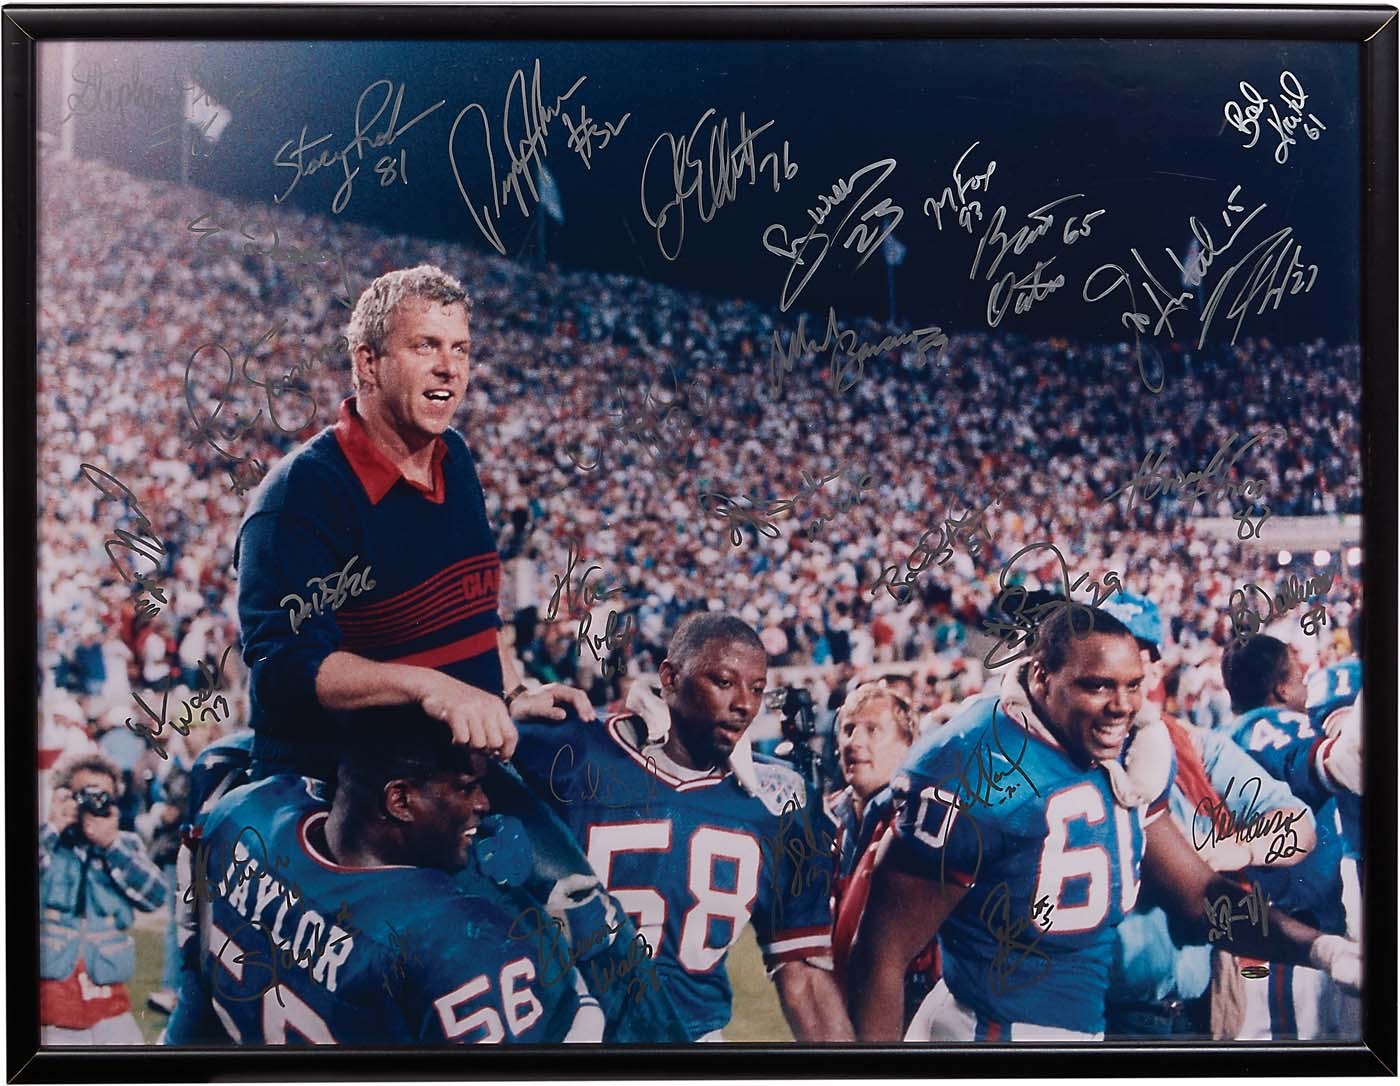 1990 Super Bowl Champion NY Giants Team-Signed 30x40" Photo (Steiner)